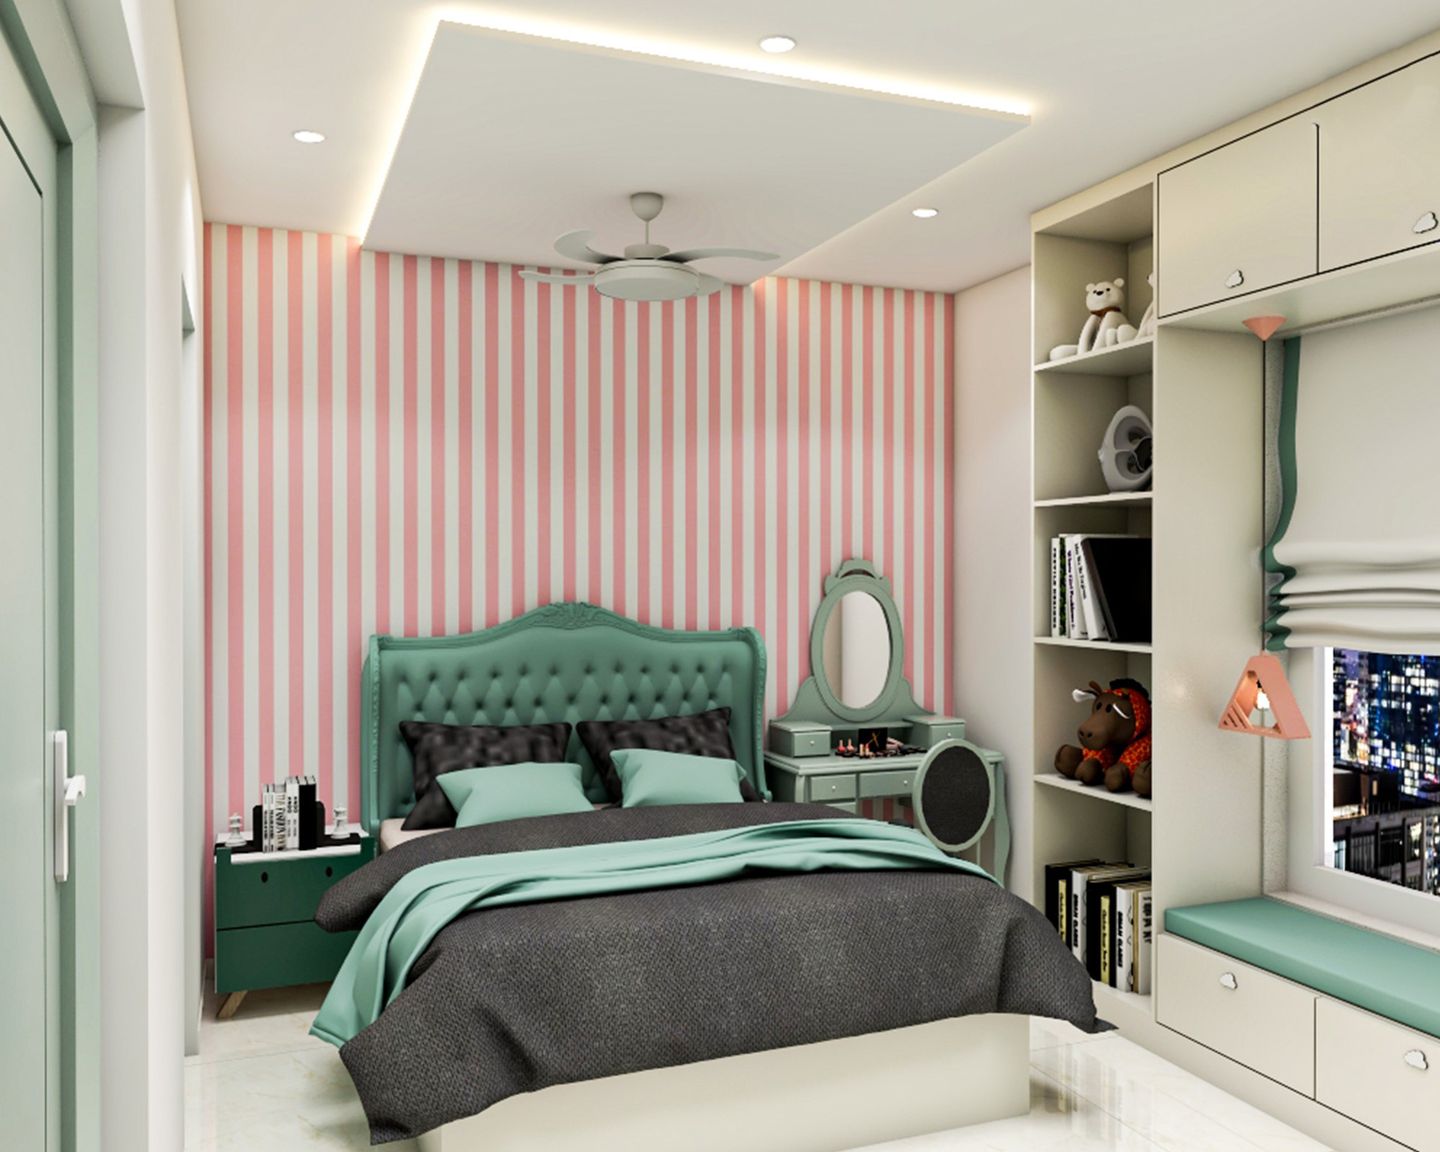 Pink And White Striped Bedroom Wall Paint Design - Livspace